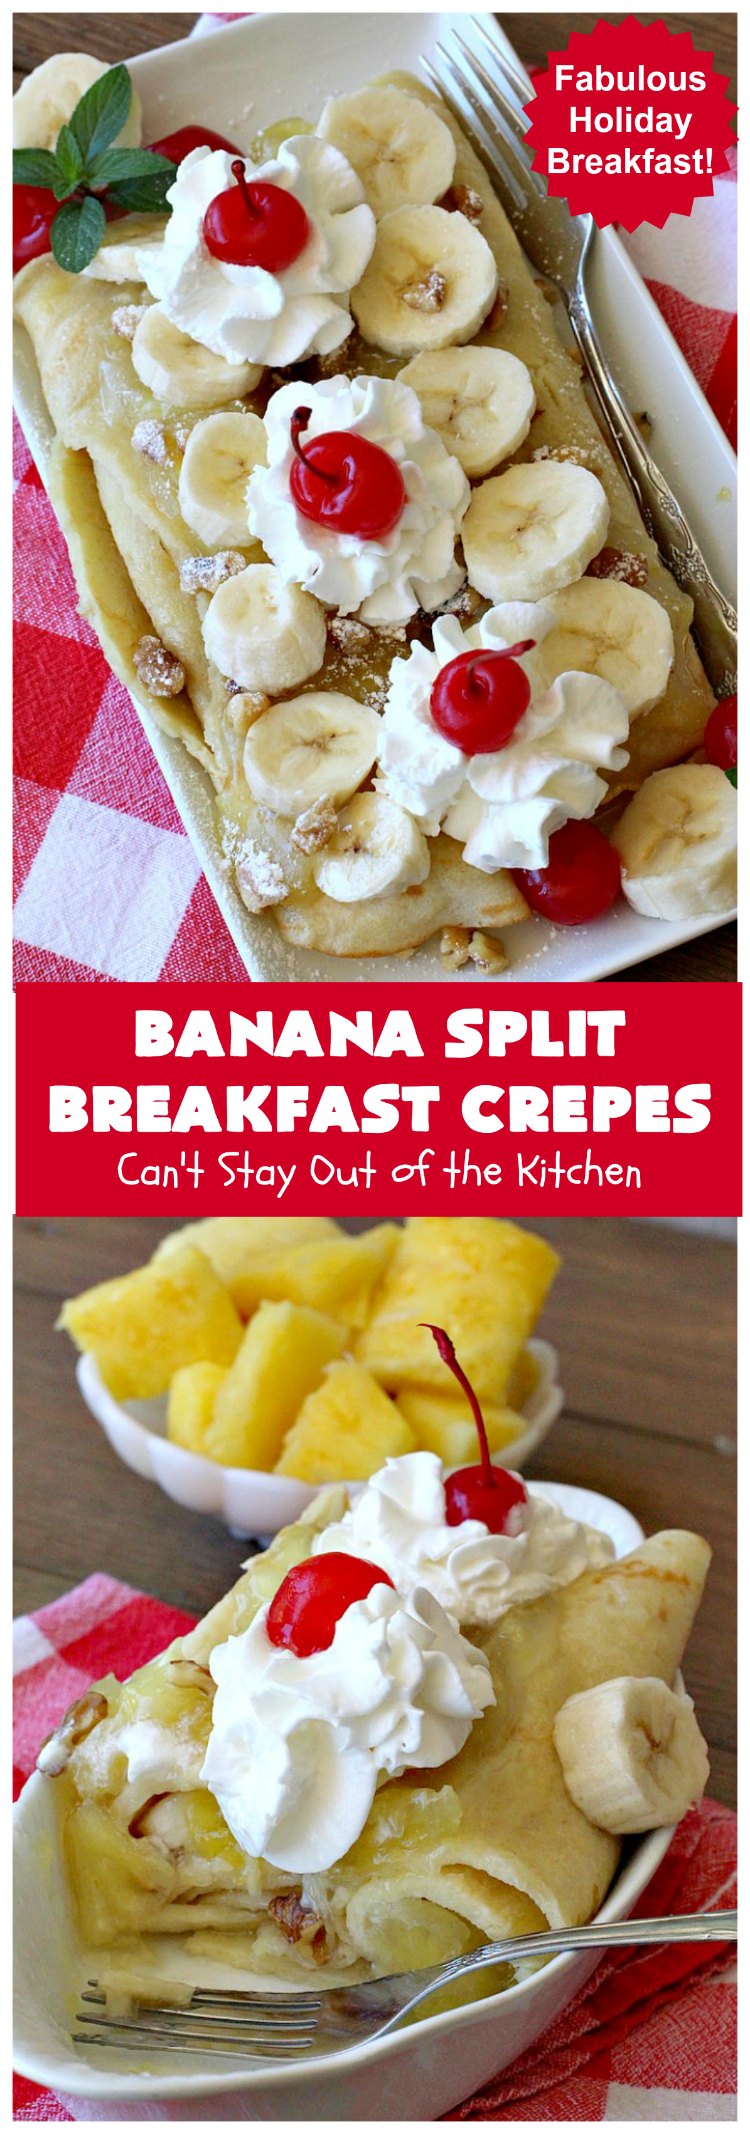 Banana Split Breakfast Crepes | Can't Stay Out of the Kitchen